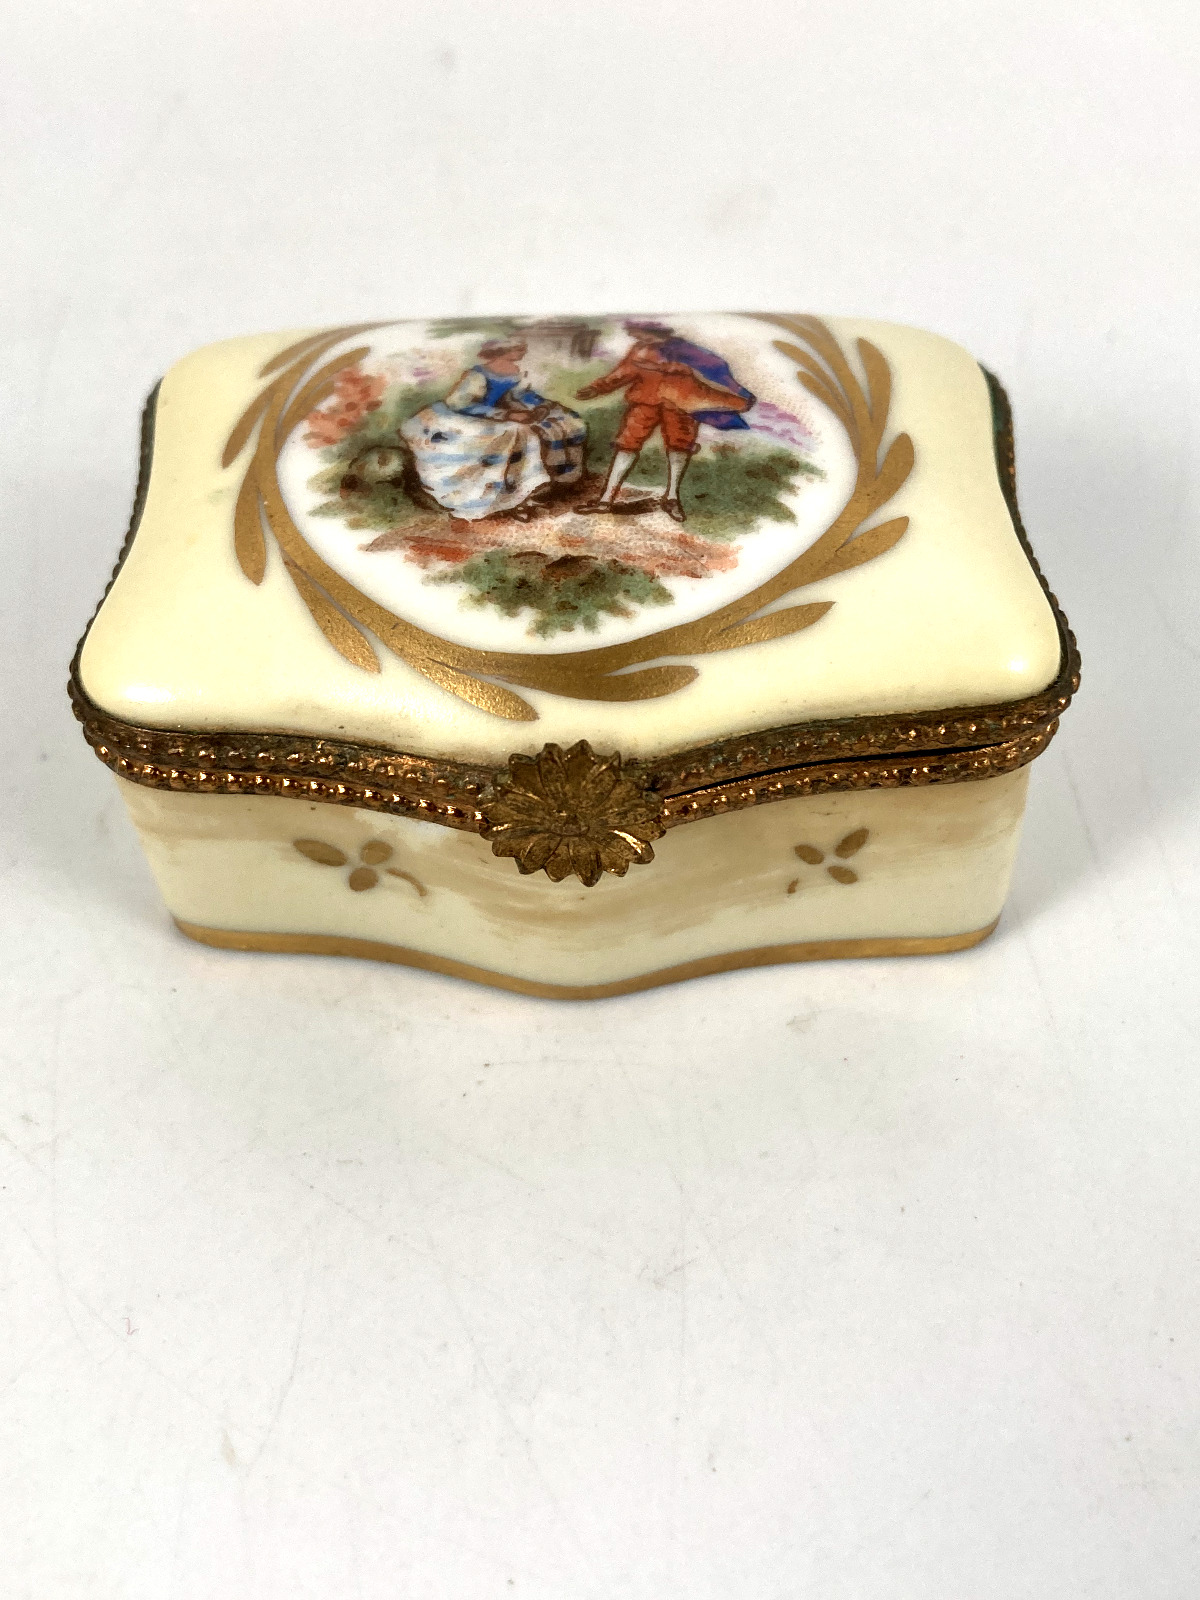 MADE IN FRANCE YELLOW PORCELAIN HAND PAINTED MARKED TRINKET PILL BOX